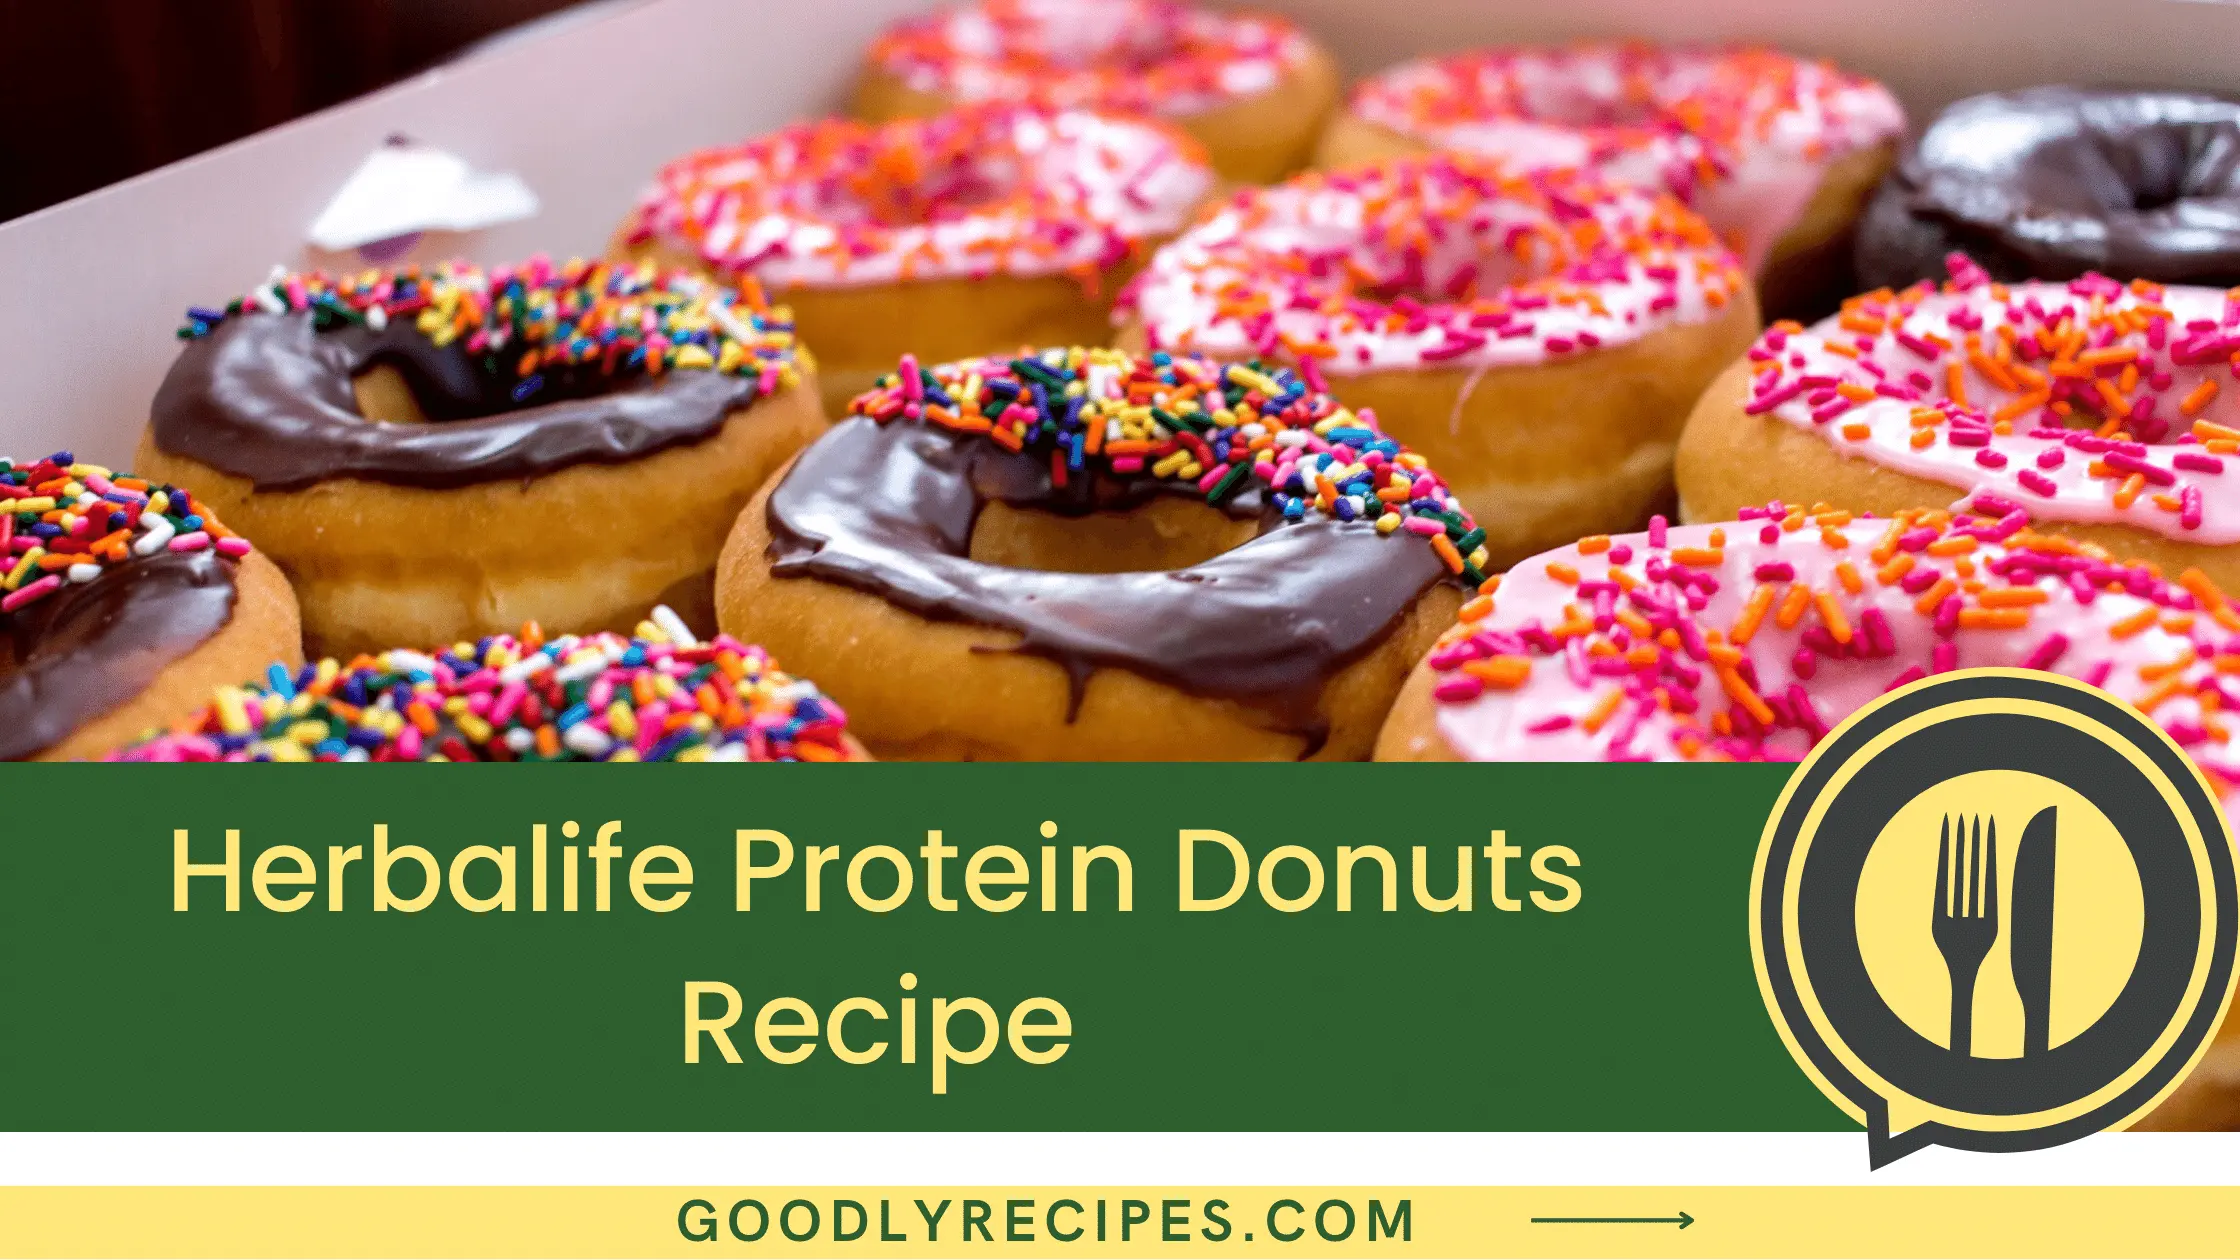 Herbalife Protein Donuts Recipe - For Food Lovers